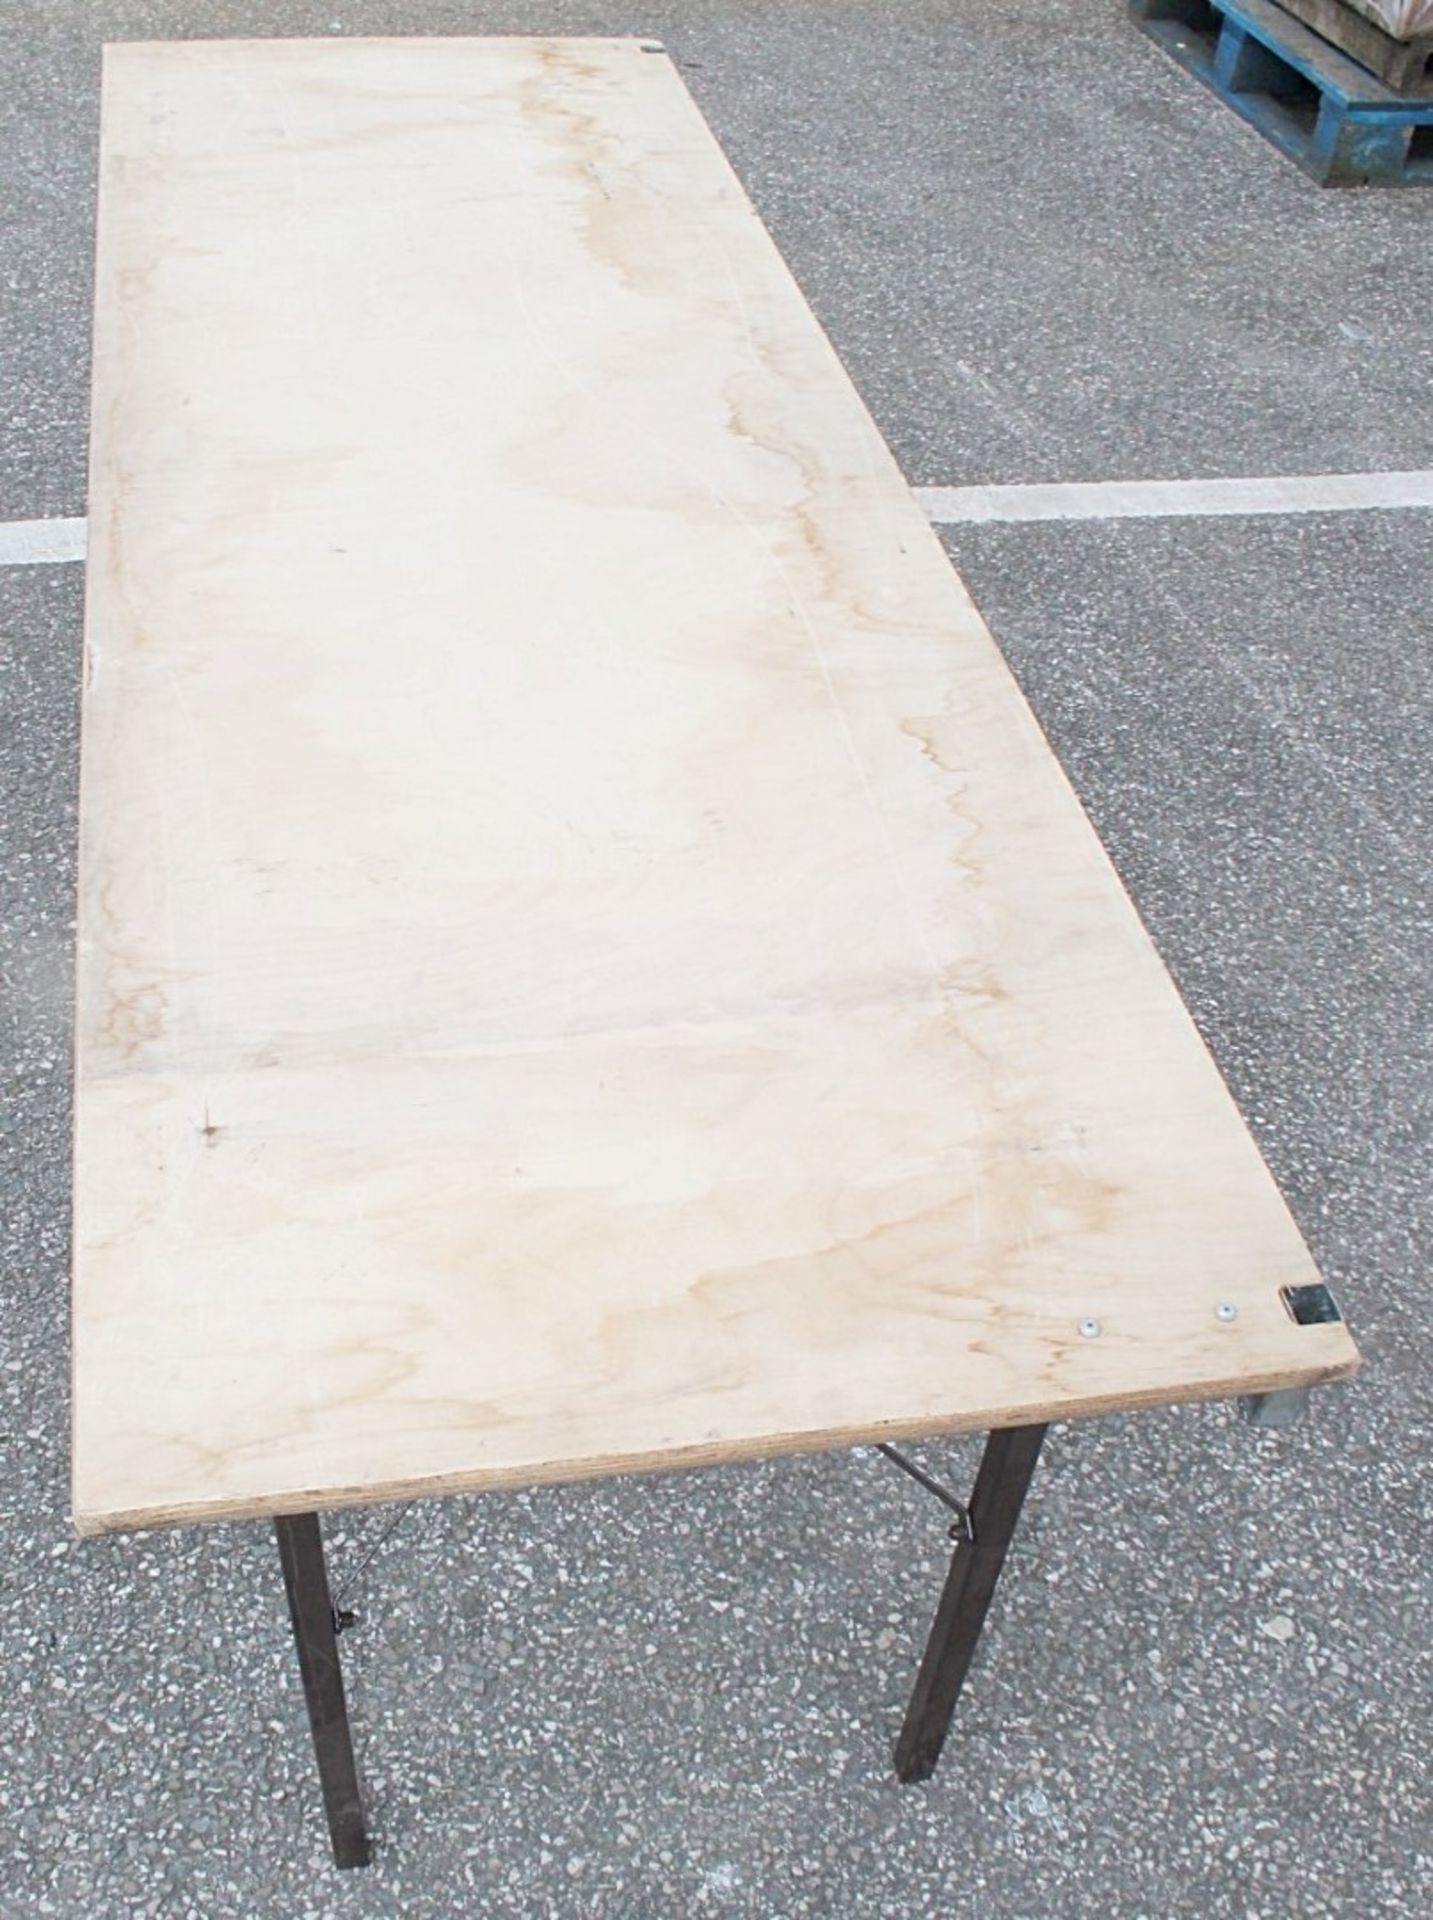 1 x Folding 6ft Wooden Topped Rectangular Trestle Table - Recently Removed From A Well-known - Image 2 of 6